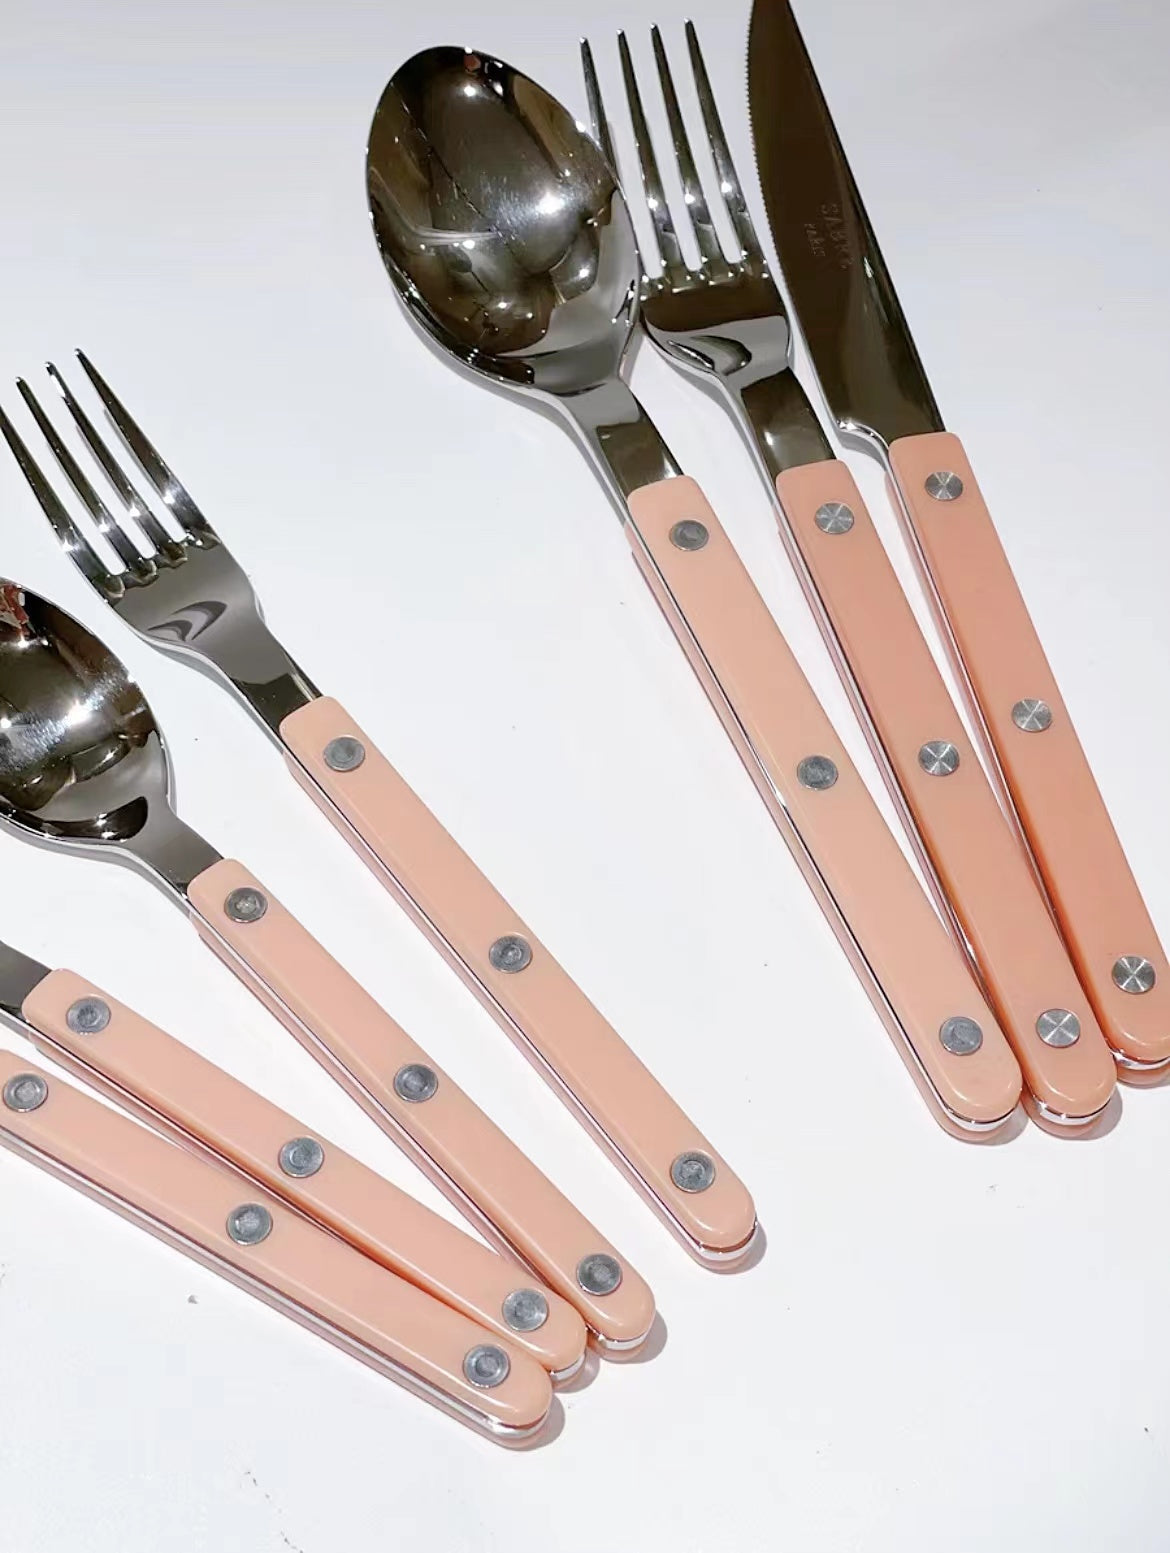 Sabre Bistrot Shiny-Finish Flatware, Stainless Steel on Food52